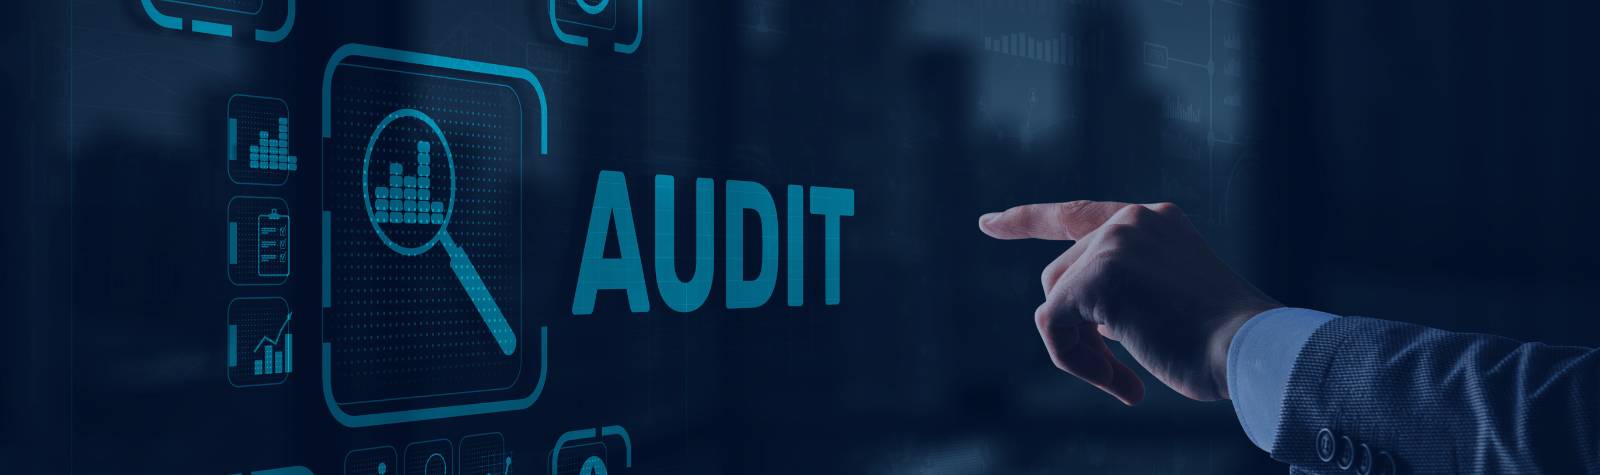 Automating Freight Audit and Payment Processes